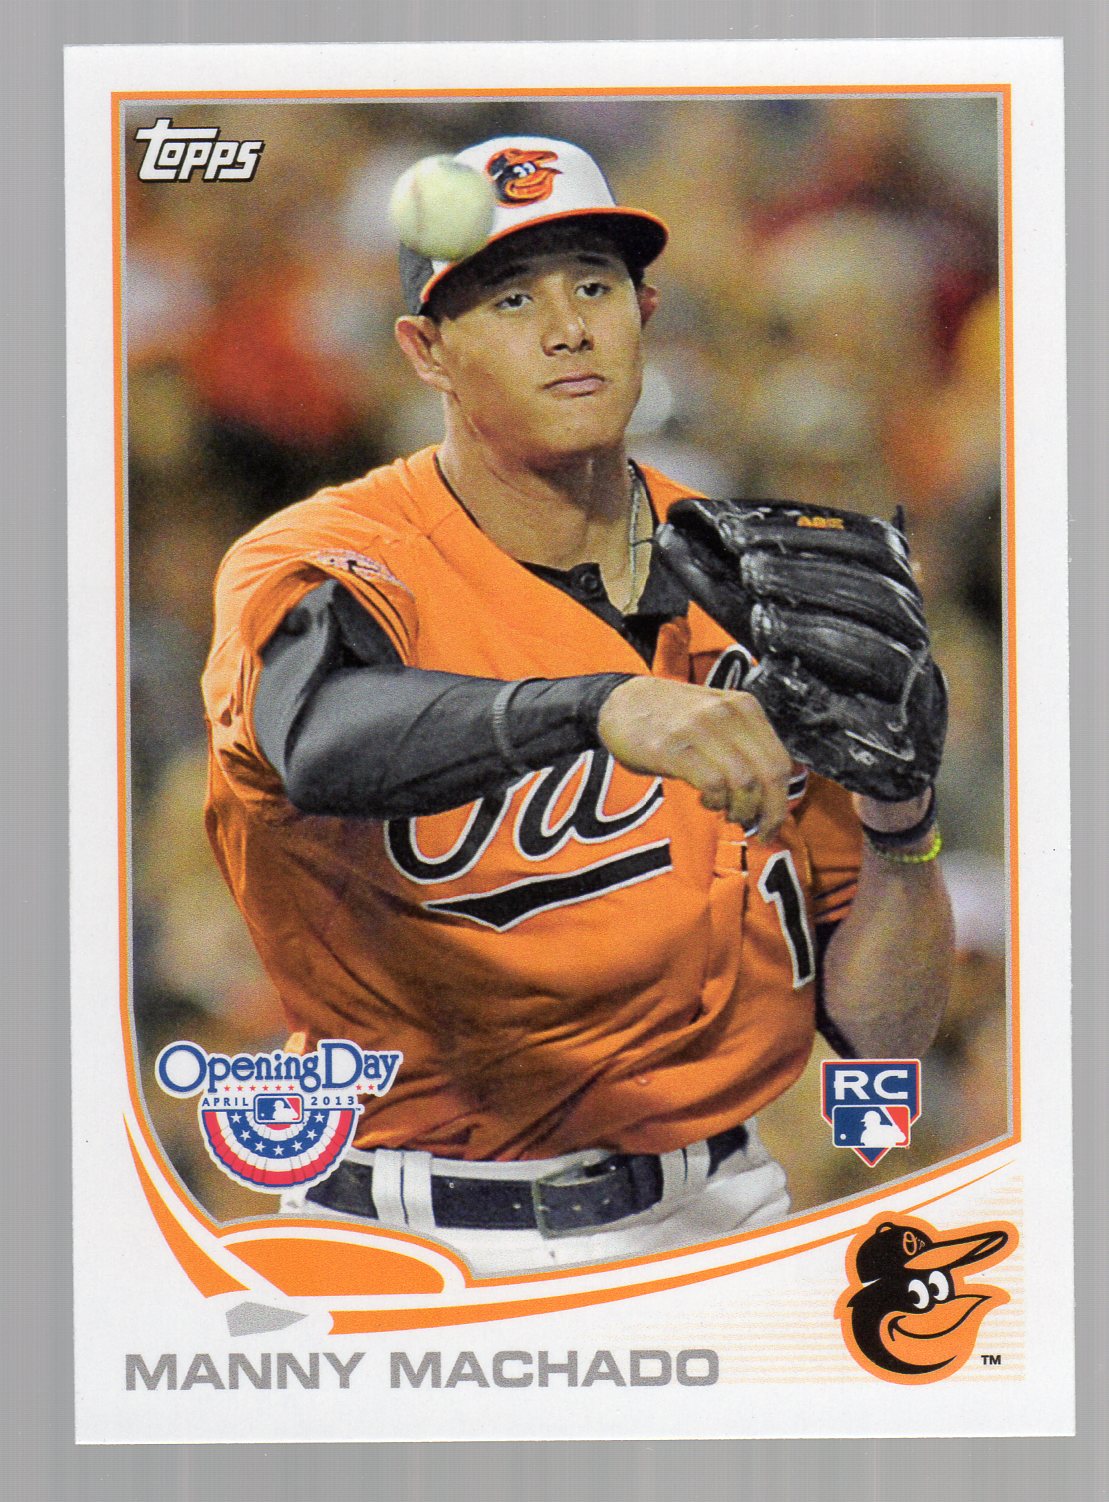 2013 Topps Opening Day #172 Manny Machado RC